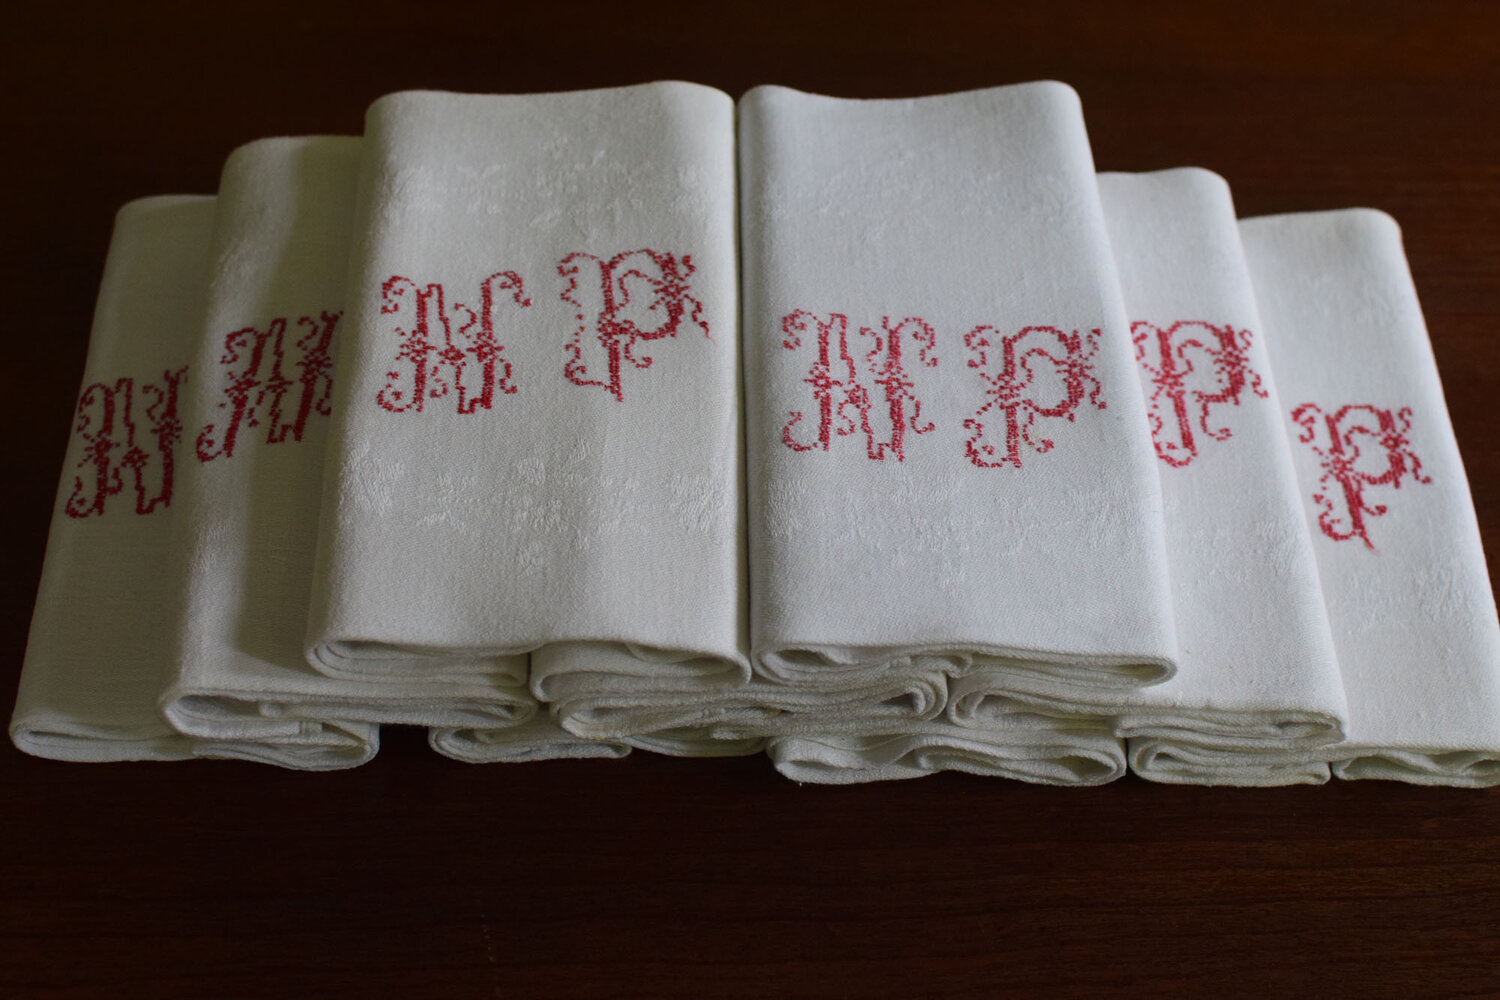 Antique Monogrammed Napkins - My French Country Home Box